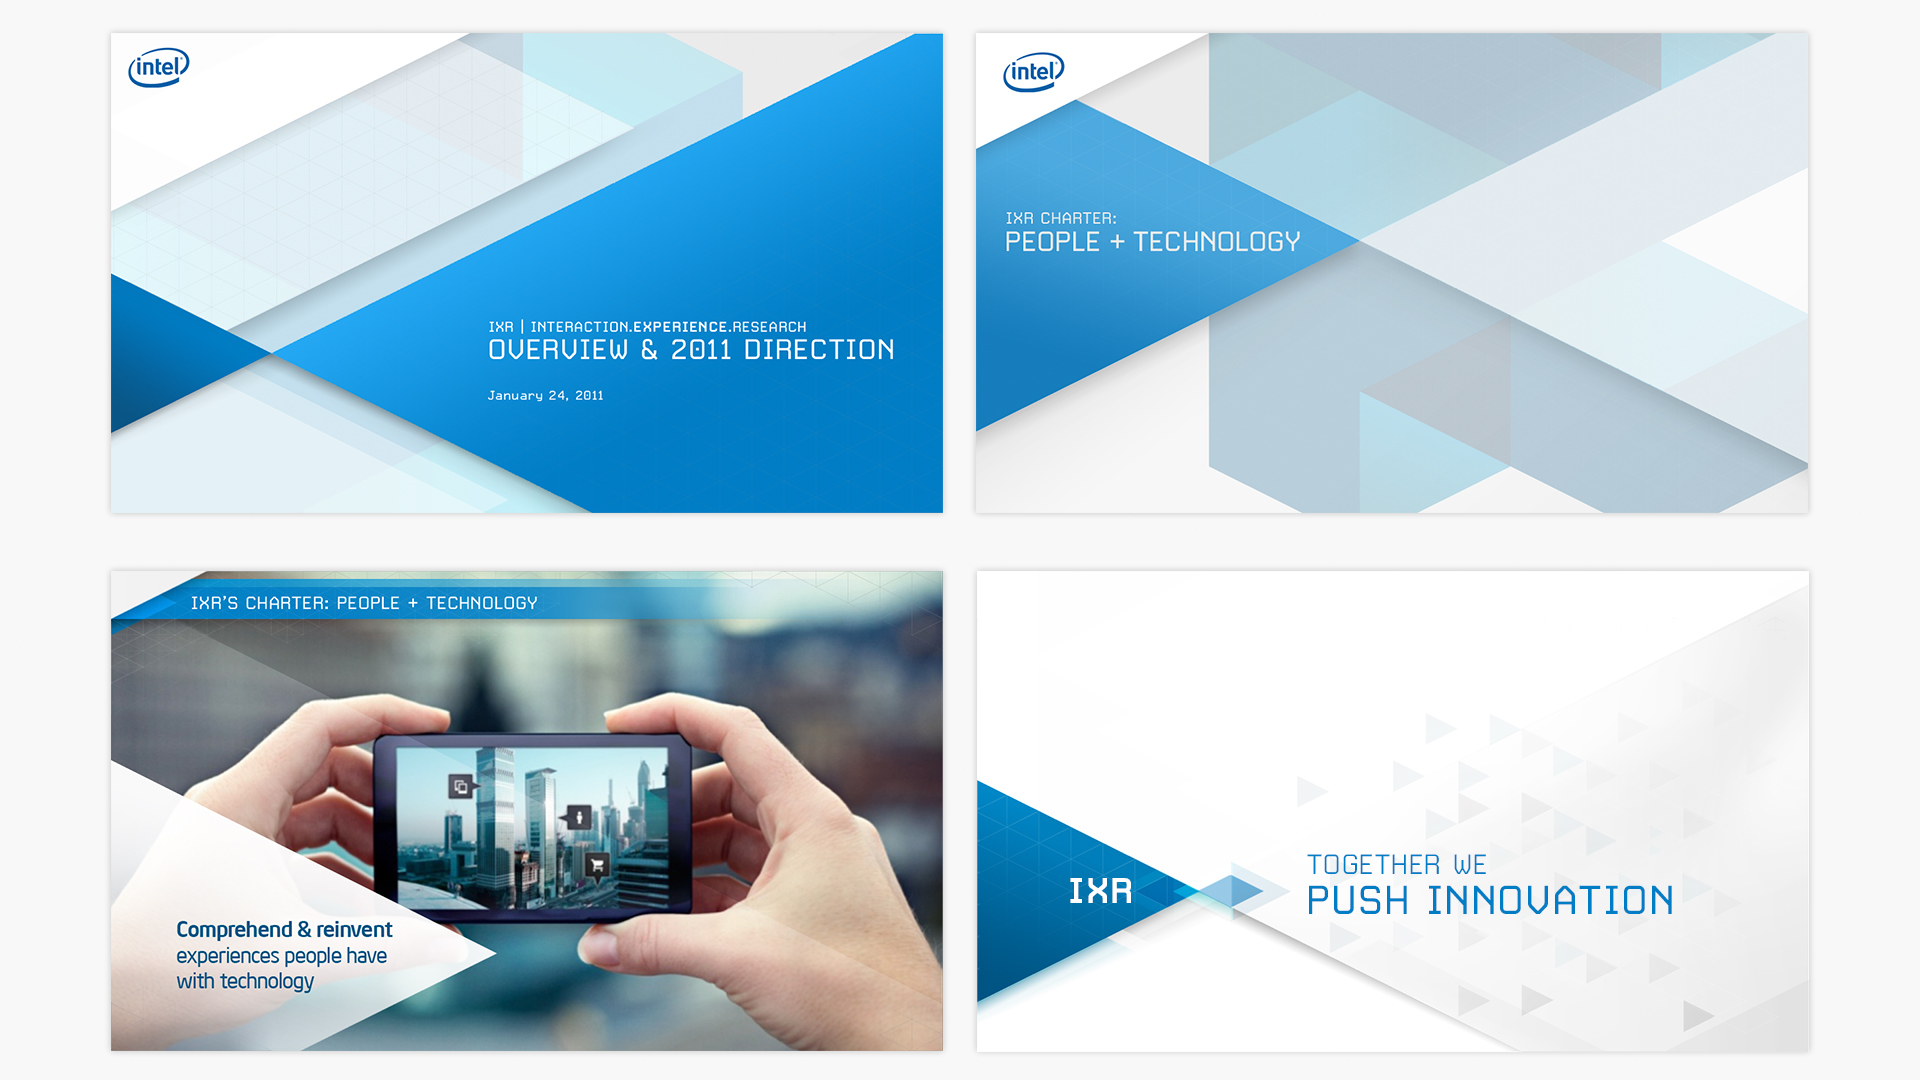 Powerpoint template design for Intel's IXR group made by Incubate Design